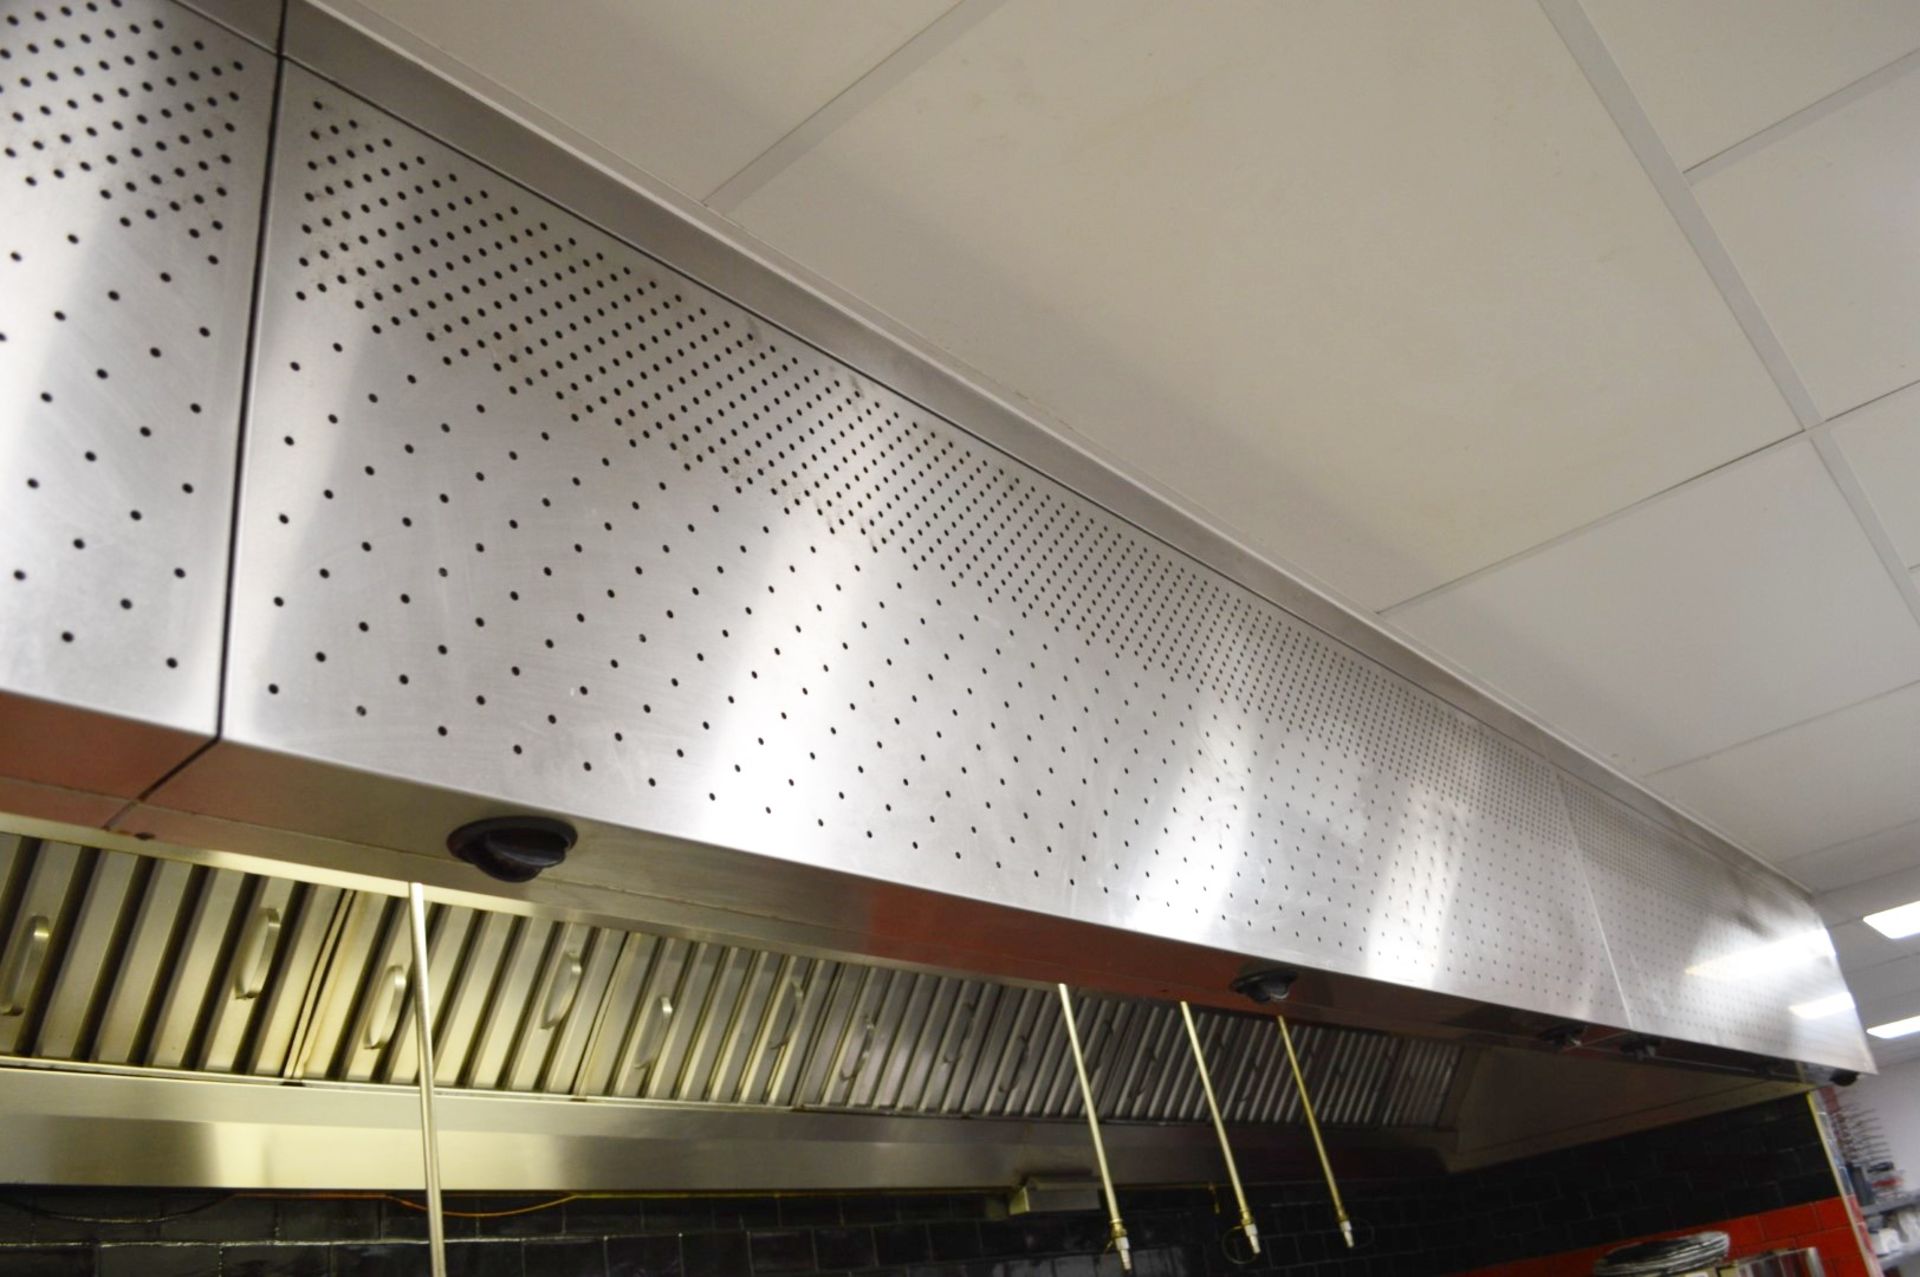 1 x Commercial Stainless Steel Kitchen Extractor Canopy - 30ft Length - H50 x W880 x D140 cms - - Image 5 of 6